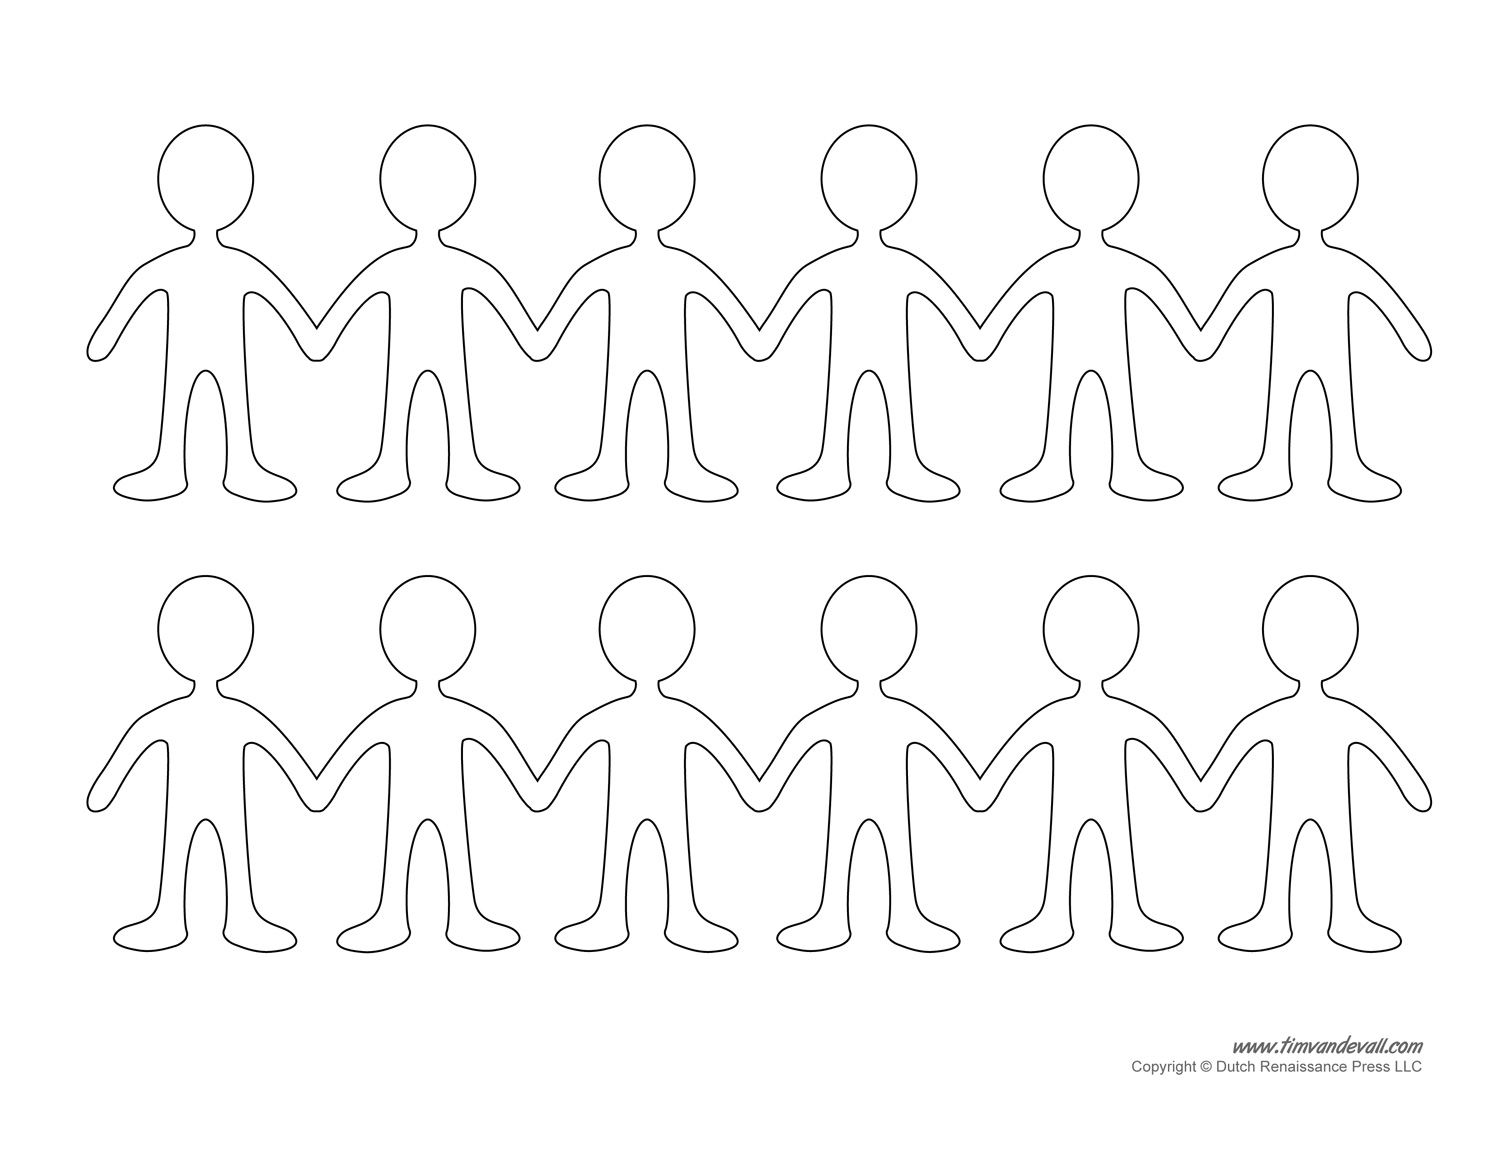 Paper Doll Template Printable from www.timvandevall.com